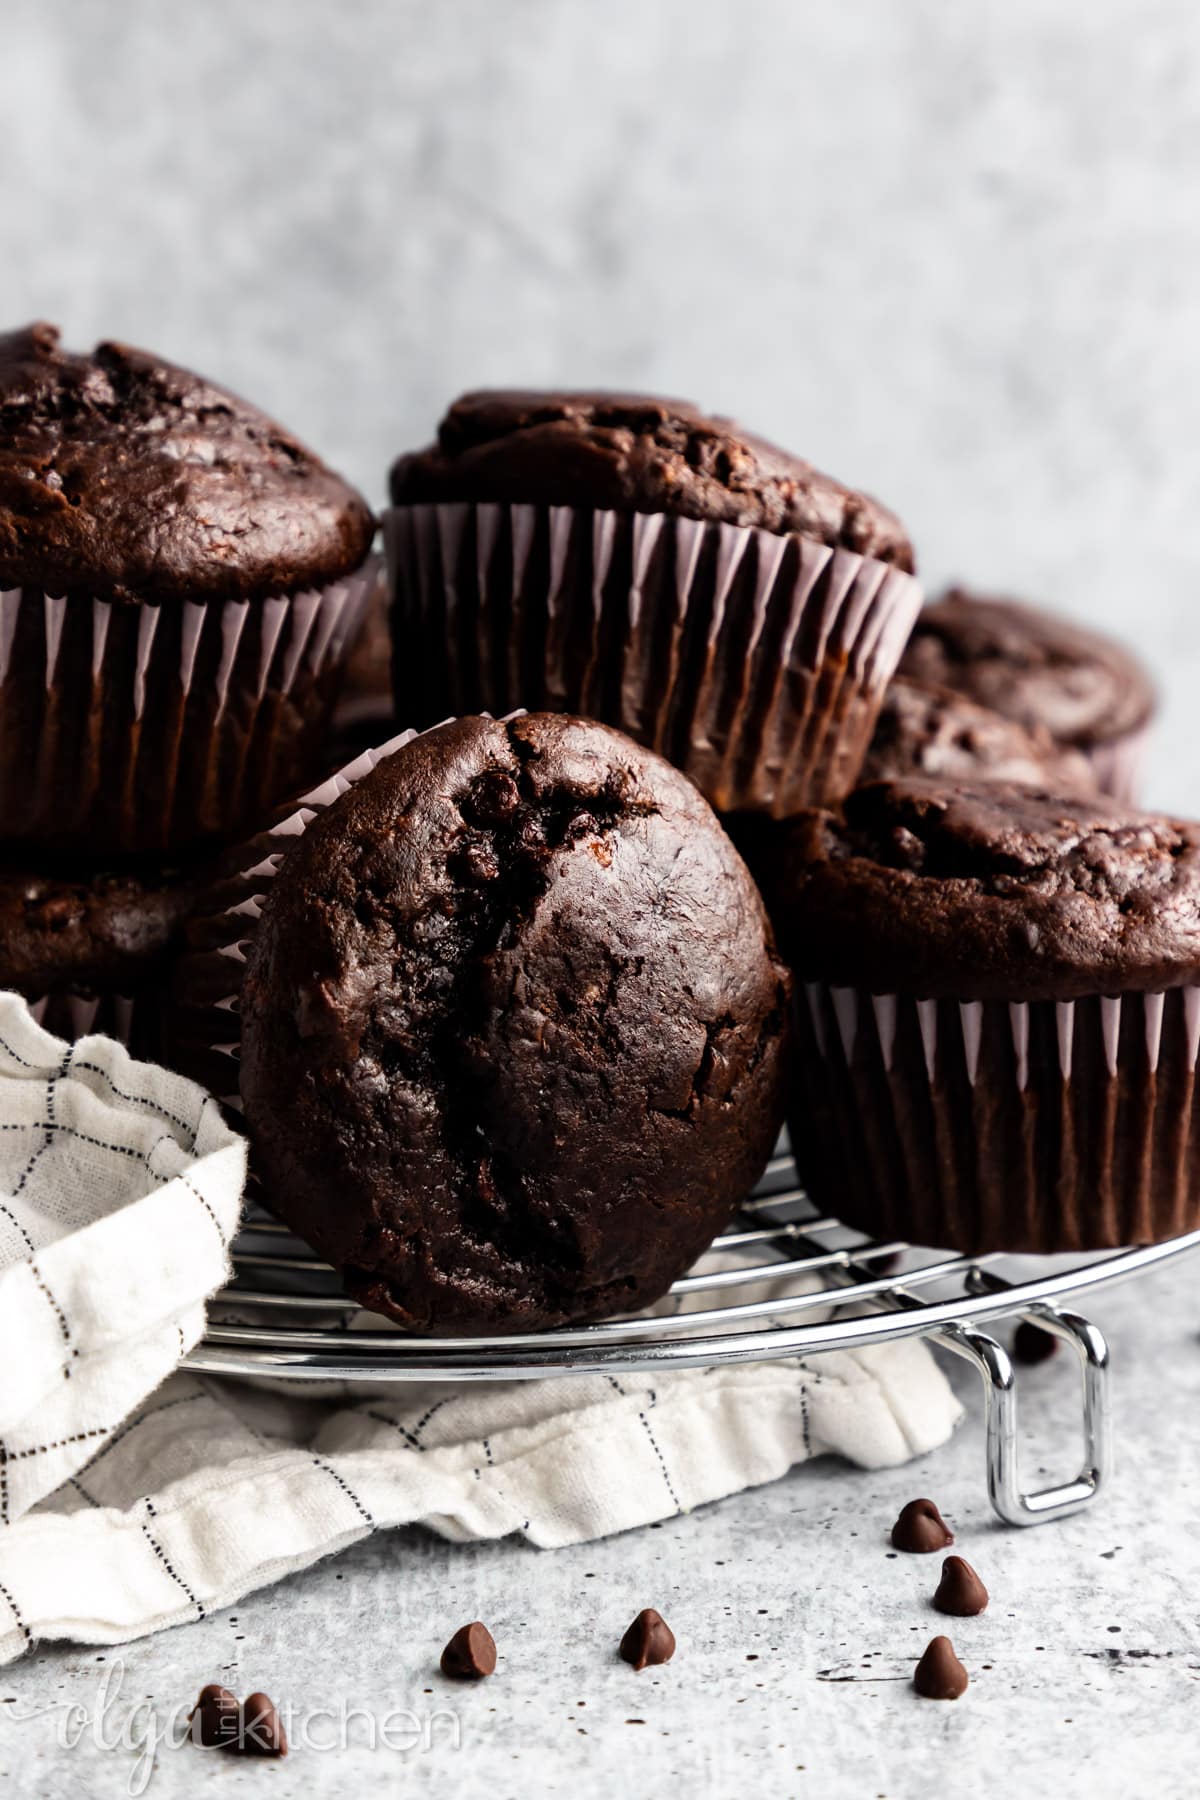 These Double Chocolate Banana Muffins are so easy to make, bursting with rich chocolate flavor and loaded with chocolate chips. They are soft and perfectly moist. #olgainthekitchen #bananamuffins #chocolatemuffins #muffins #chocolatebananamuffins #breakfast